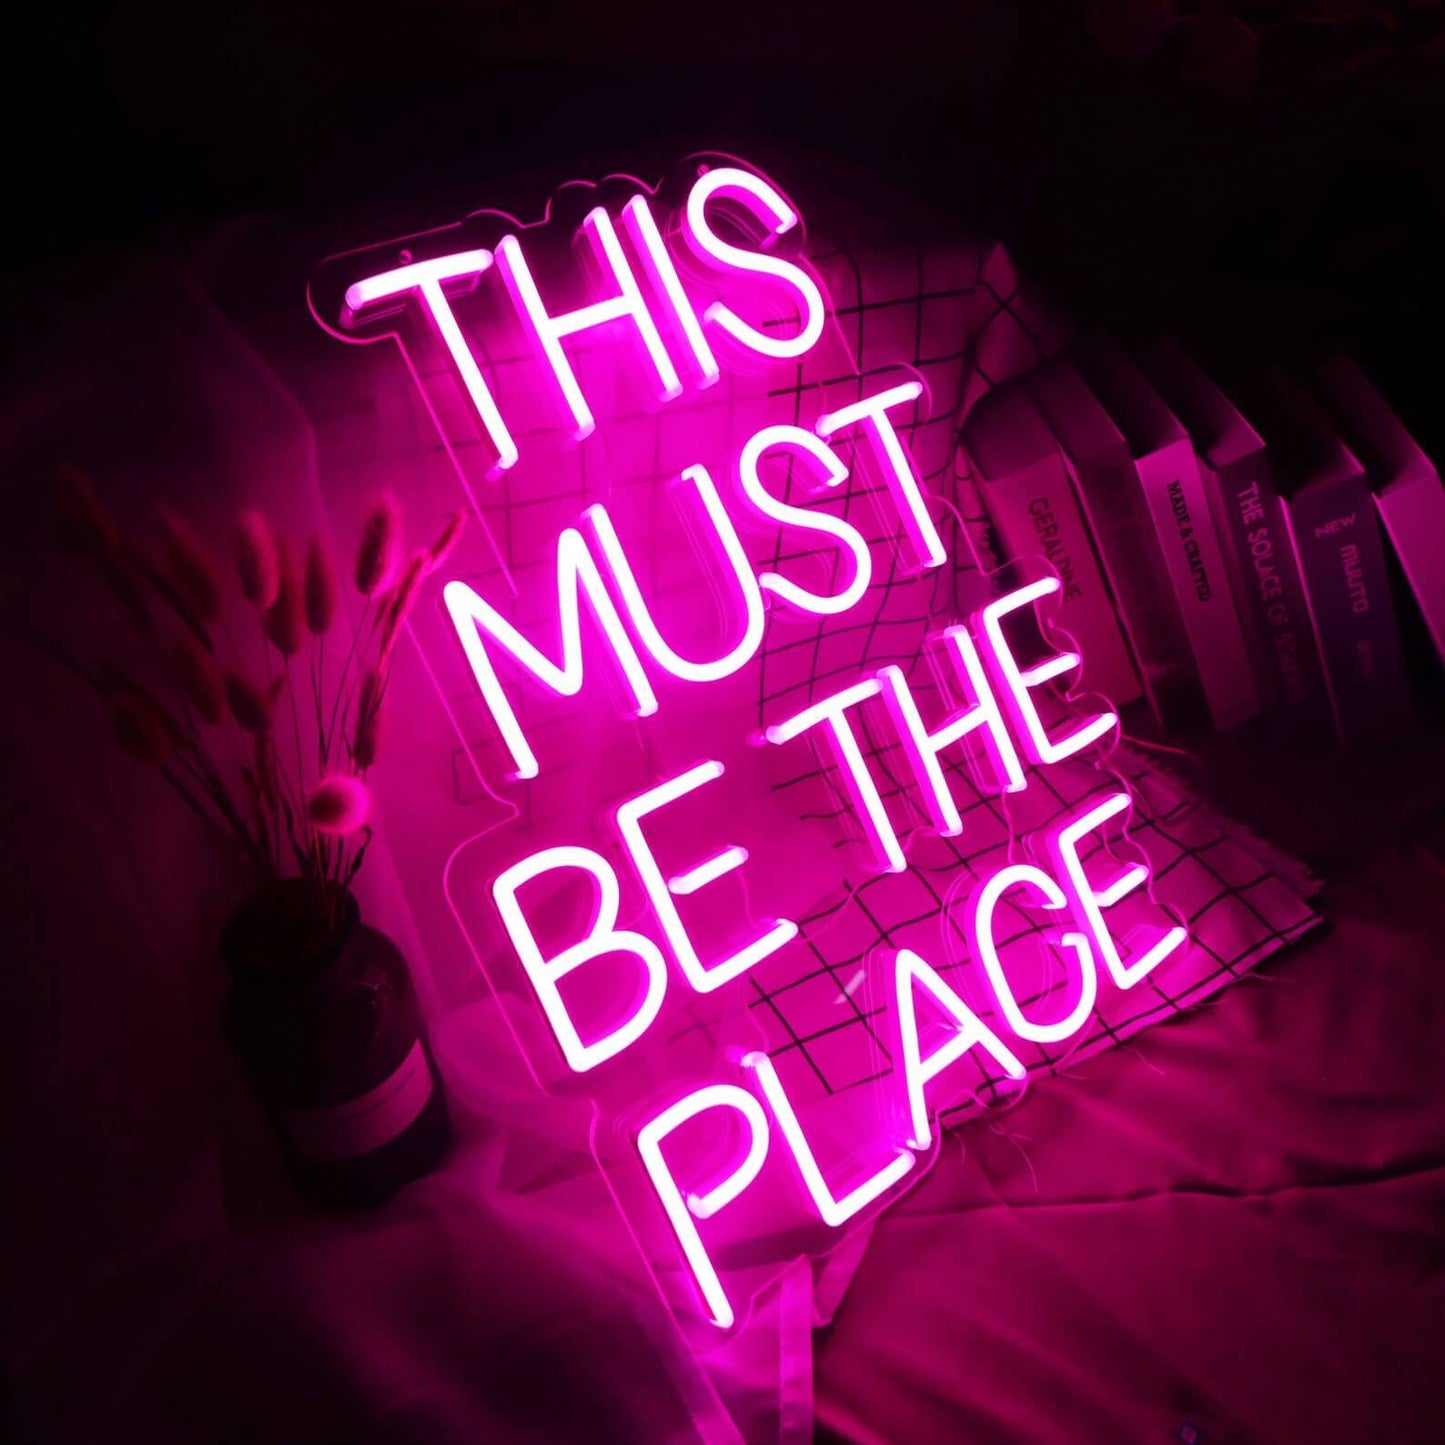 This Must Be The Place Neon Sign Light